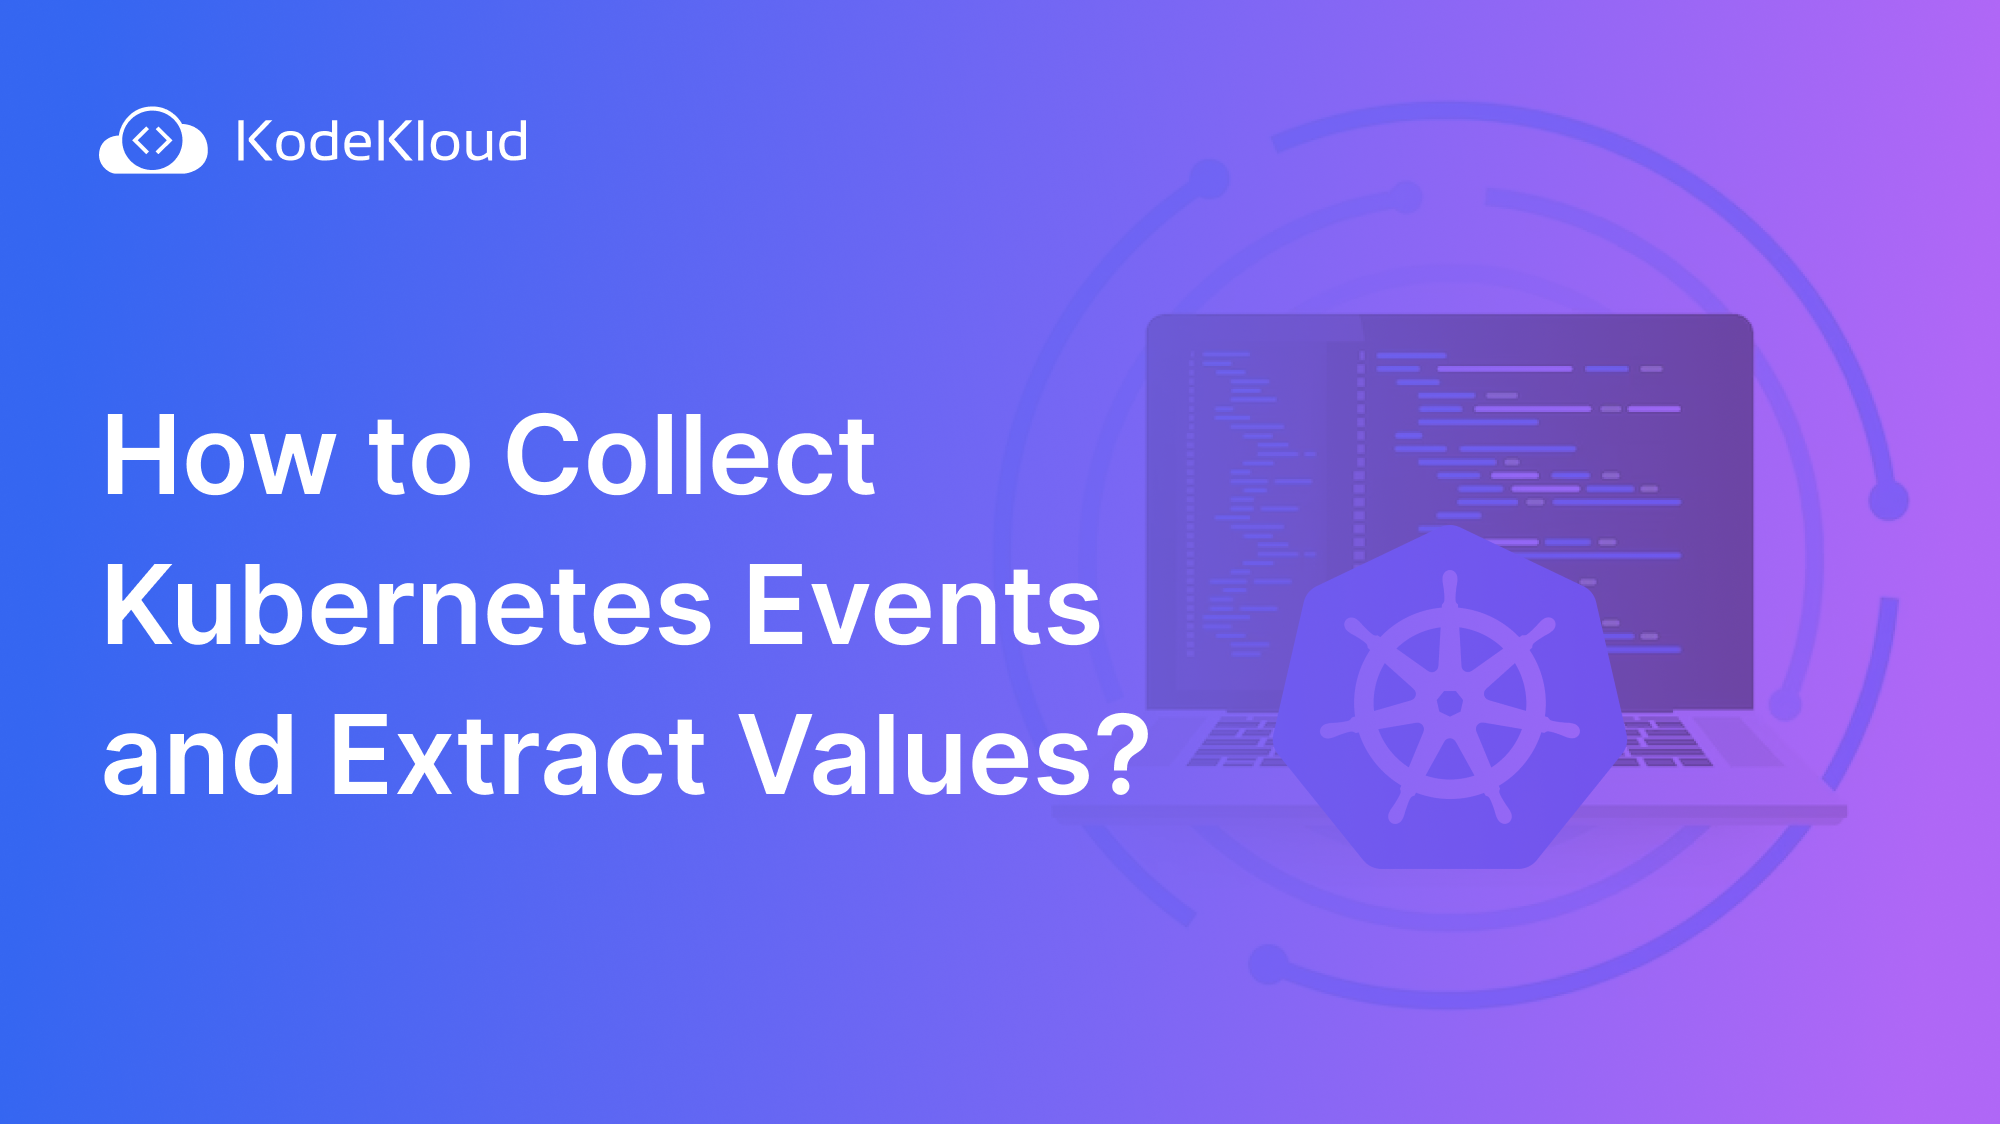 How to Collect Kubernetes Events and Extract Values?